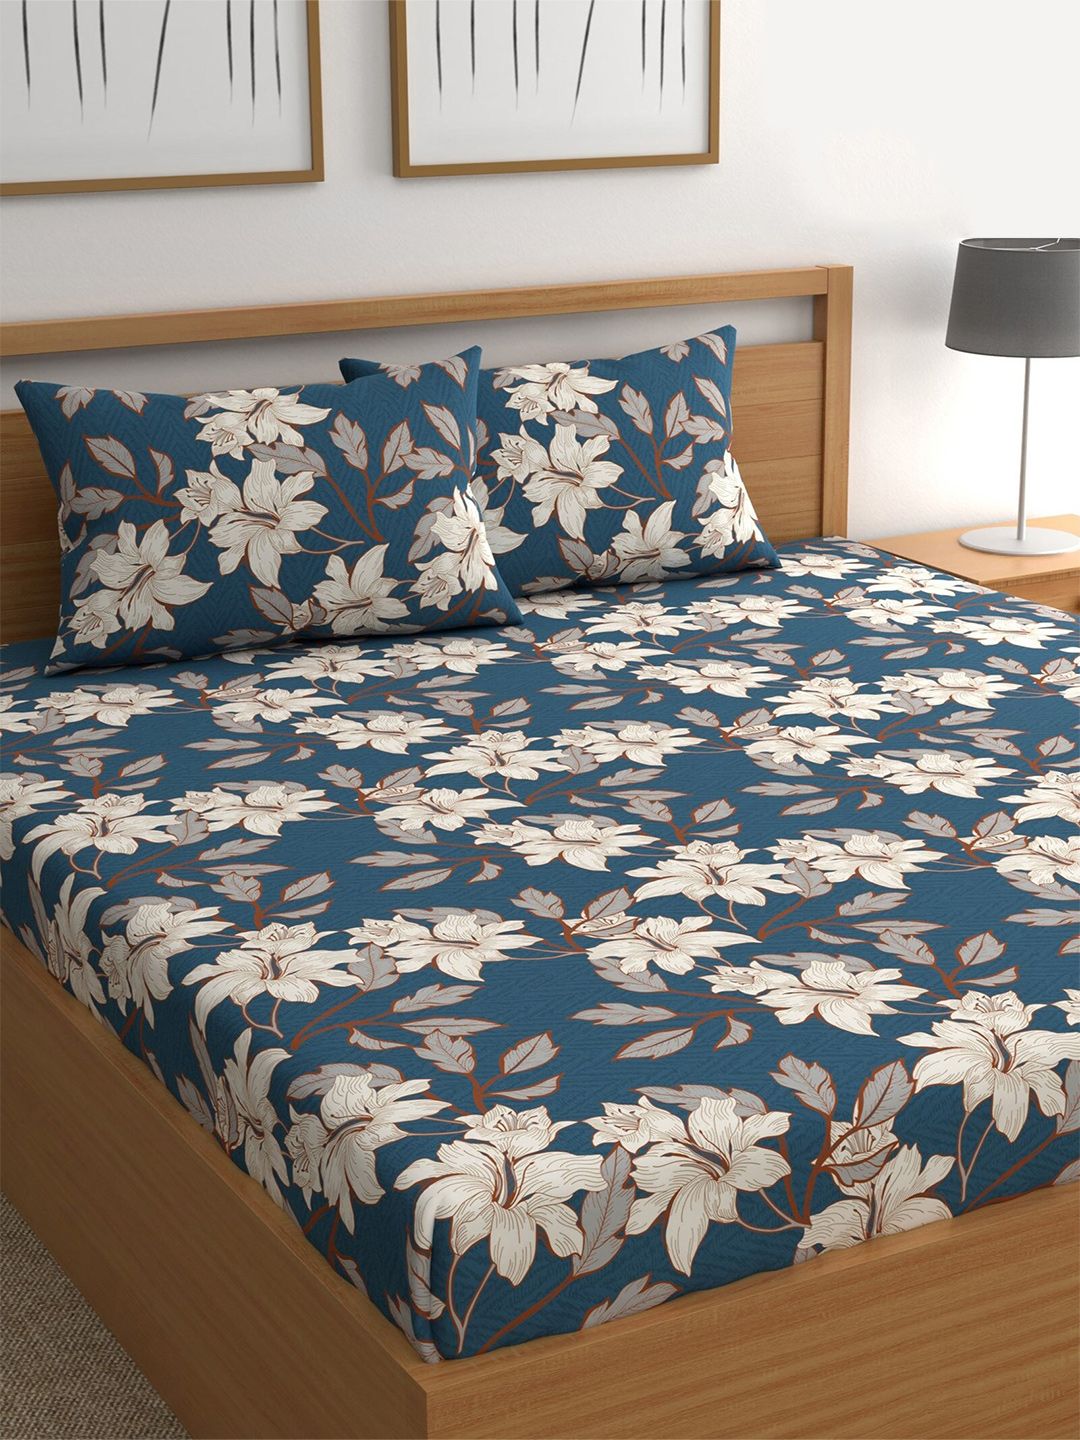 CHHAVI INDIA 210 TC Blue & White Floral Queen Bedsheet with 2 Pillow Covers Price in India